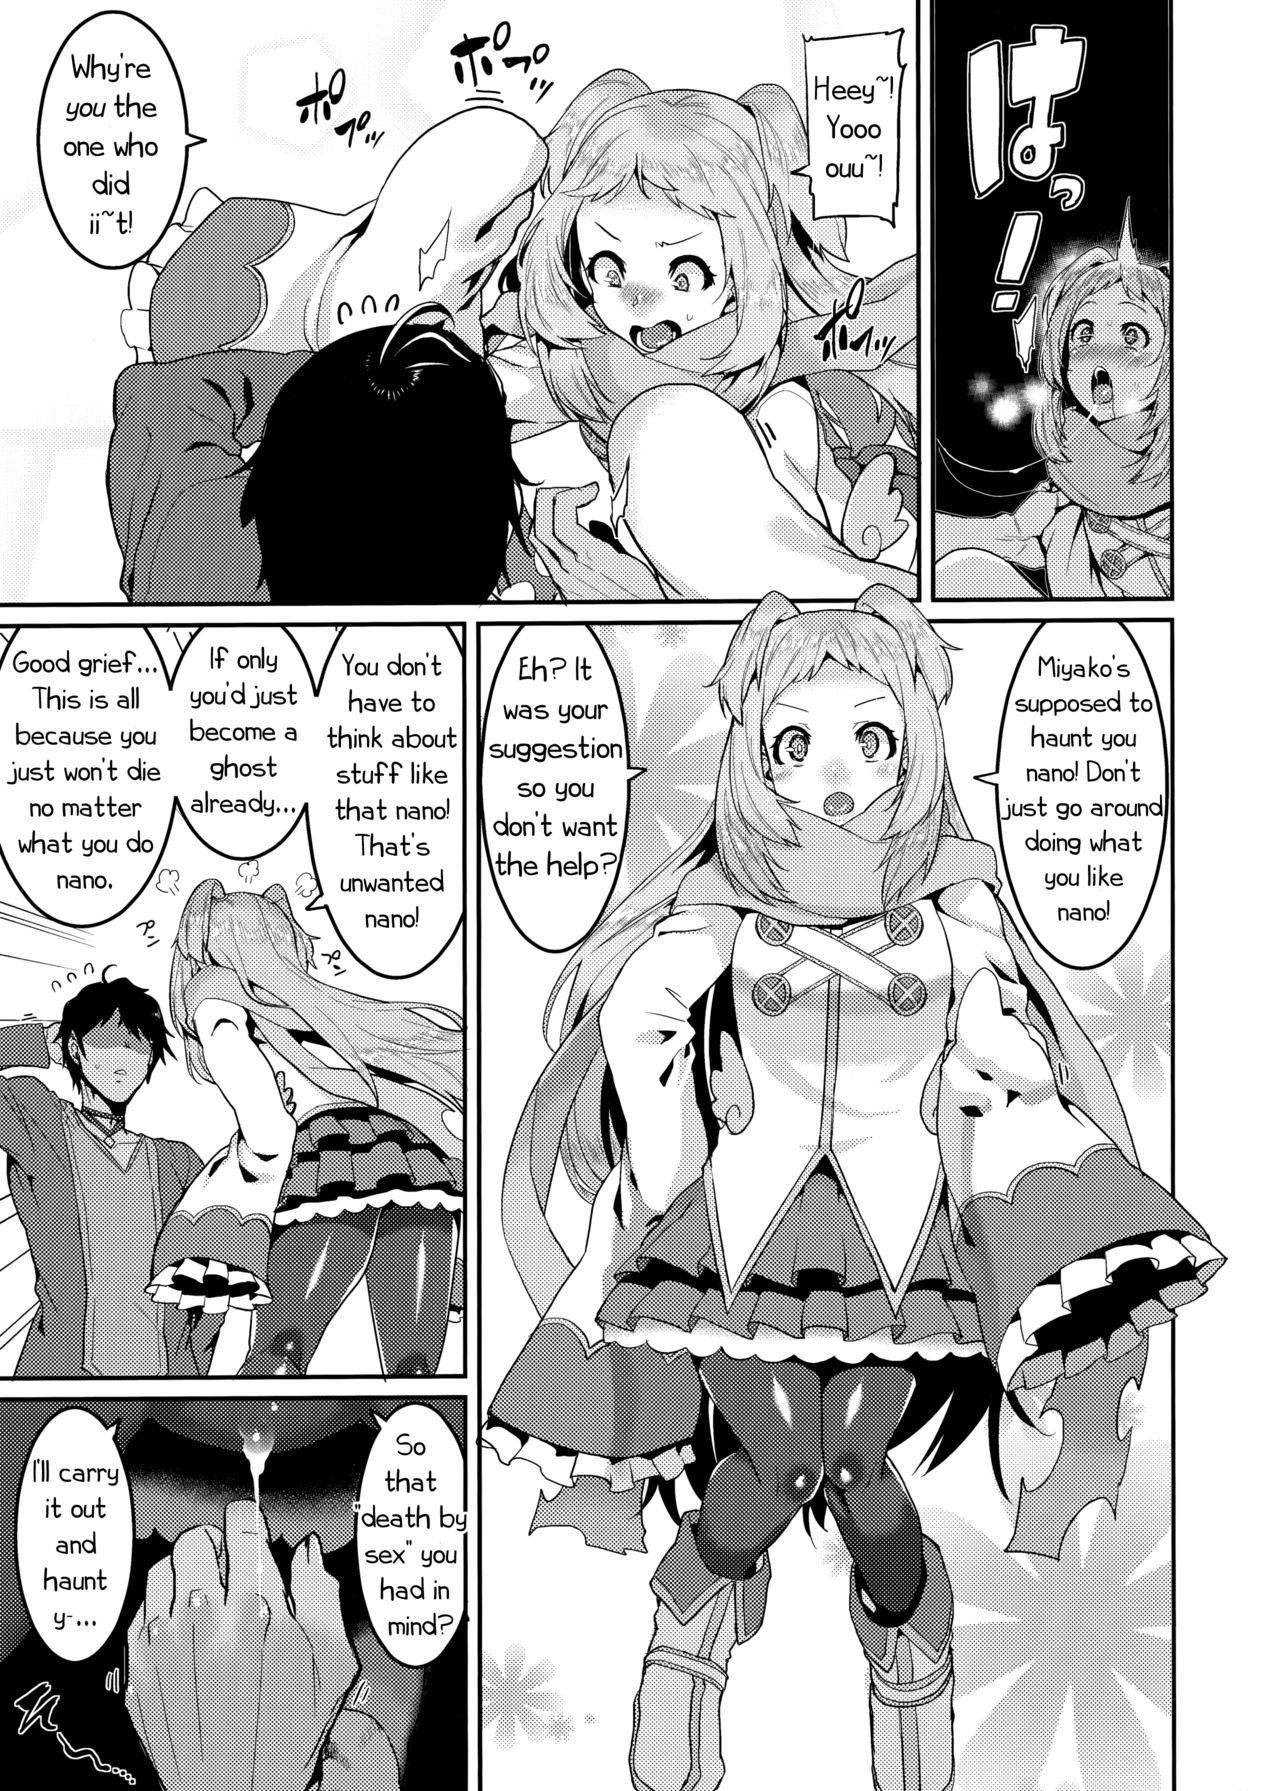 Foreskin Pudding Switch - Princess connect Tattooed - Page 7